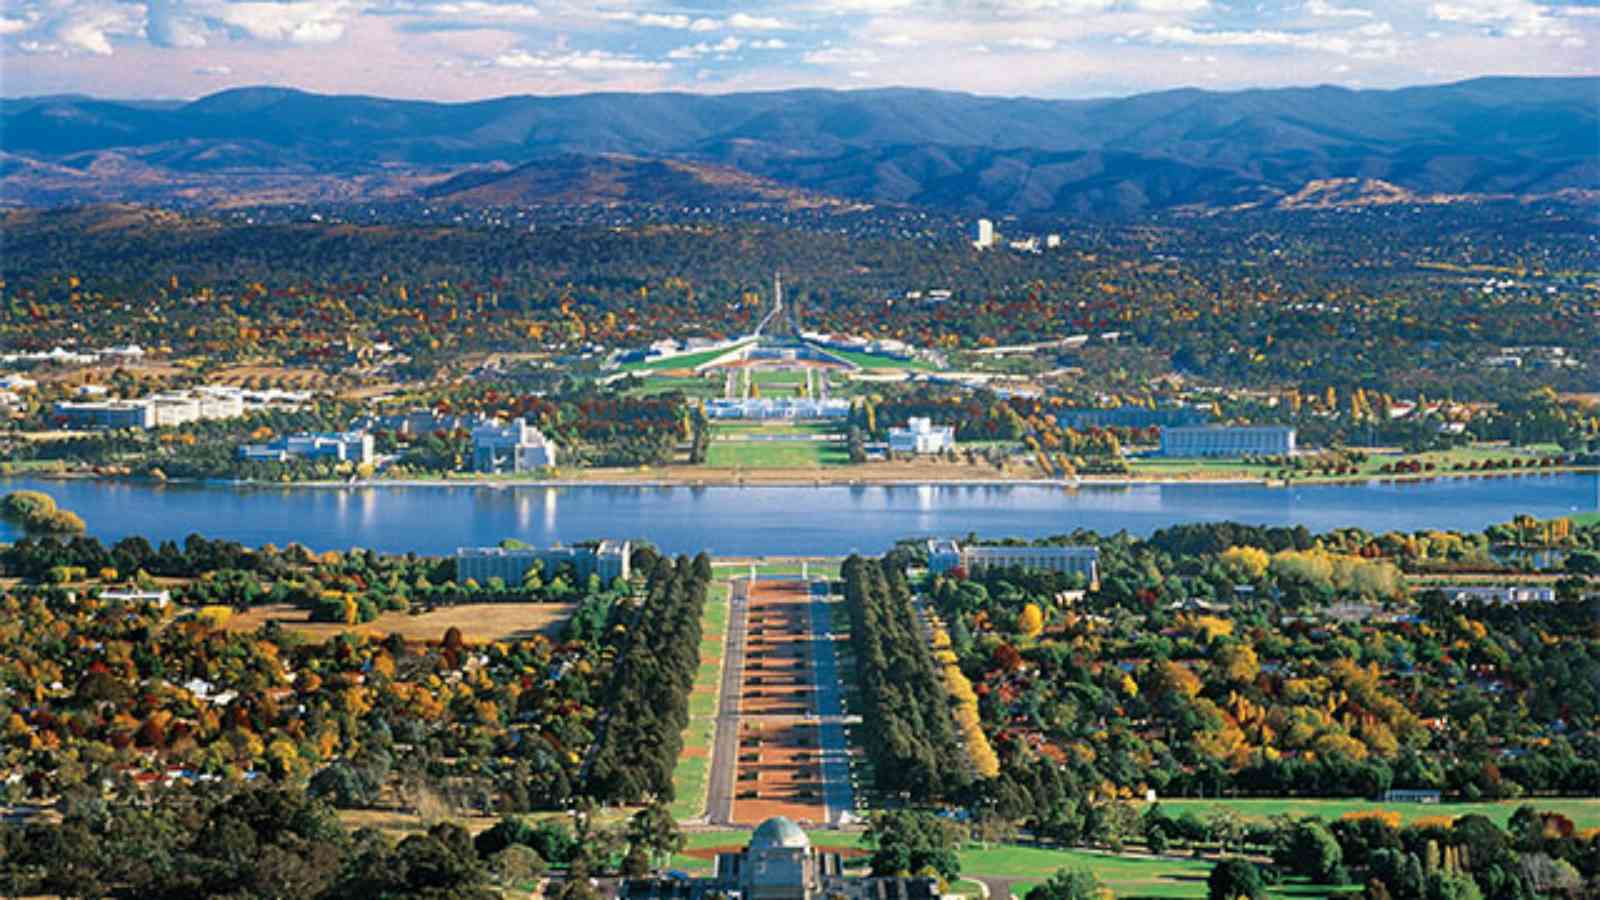 Canberra Day 2023: Date, History, Facts, Activities